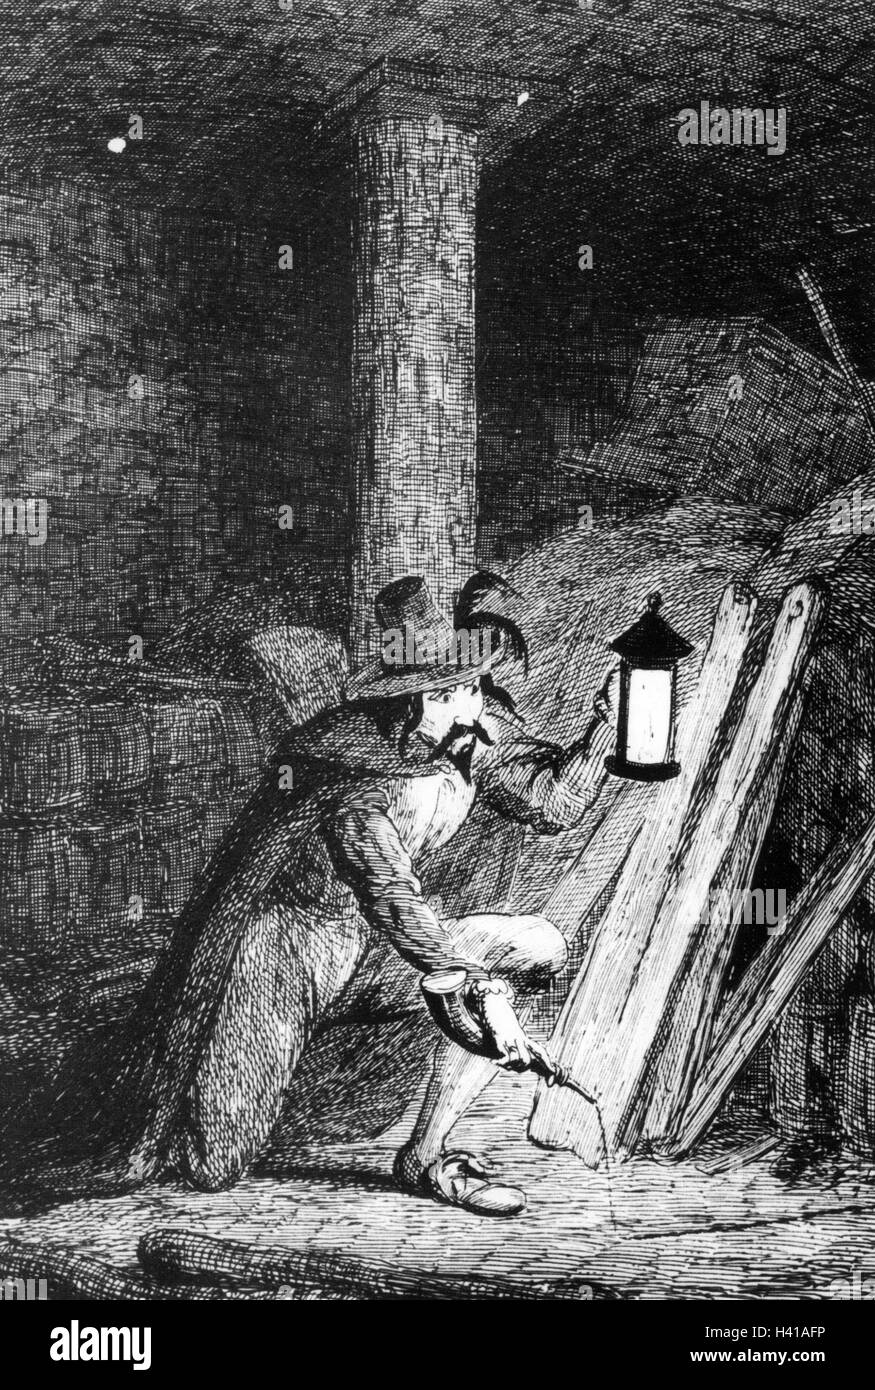 GUY FAWKES (1570-1606) preparing the Gunpowder plot under Westminster Palace from an early Victorian engraving Stock Photo